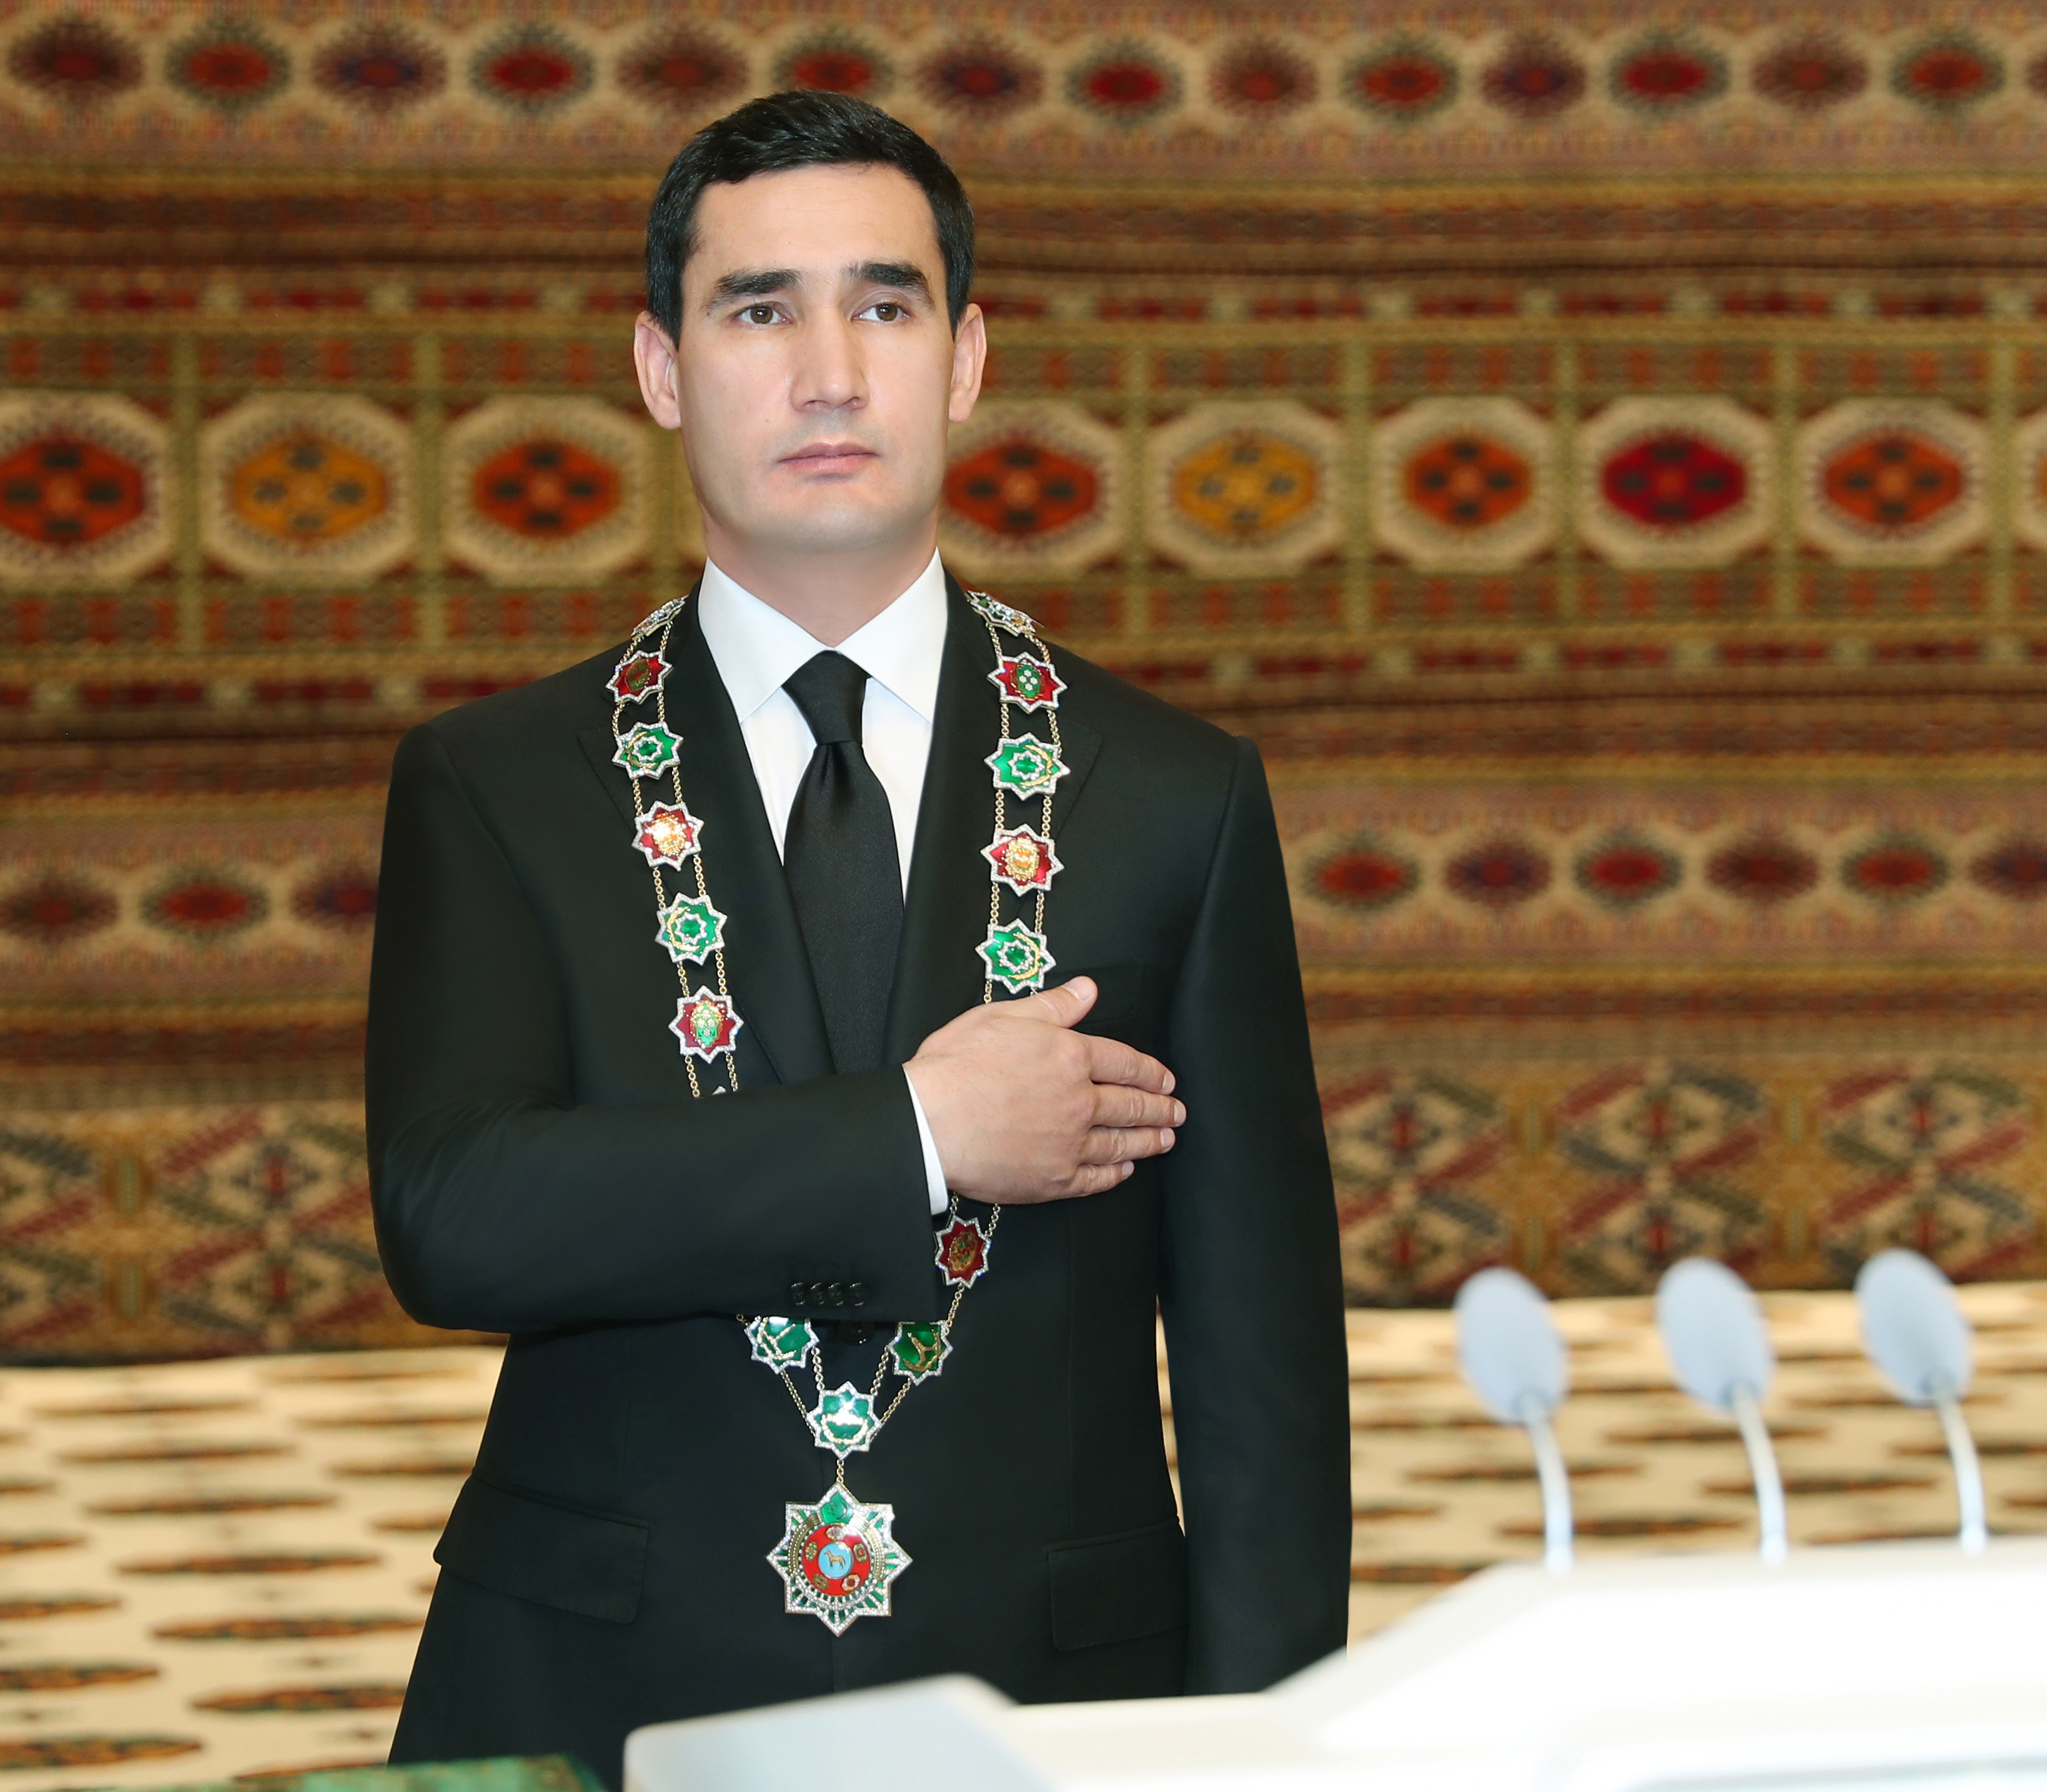 Solemn ceremony of inauguration of the President of Turkmenistan